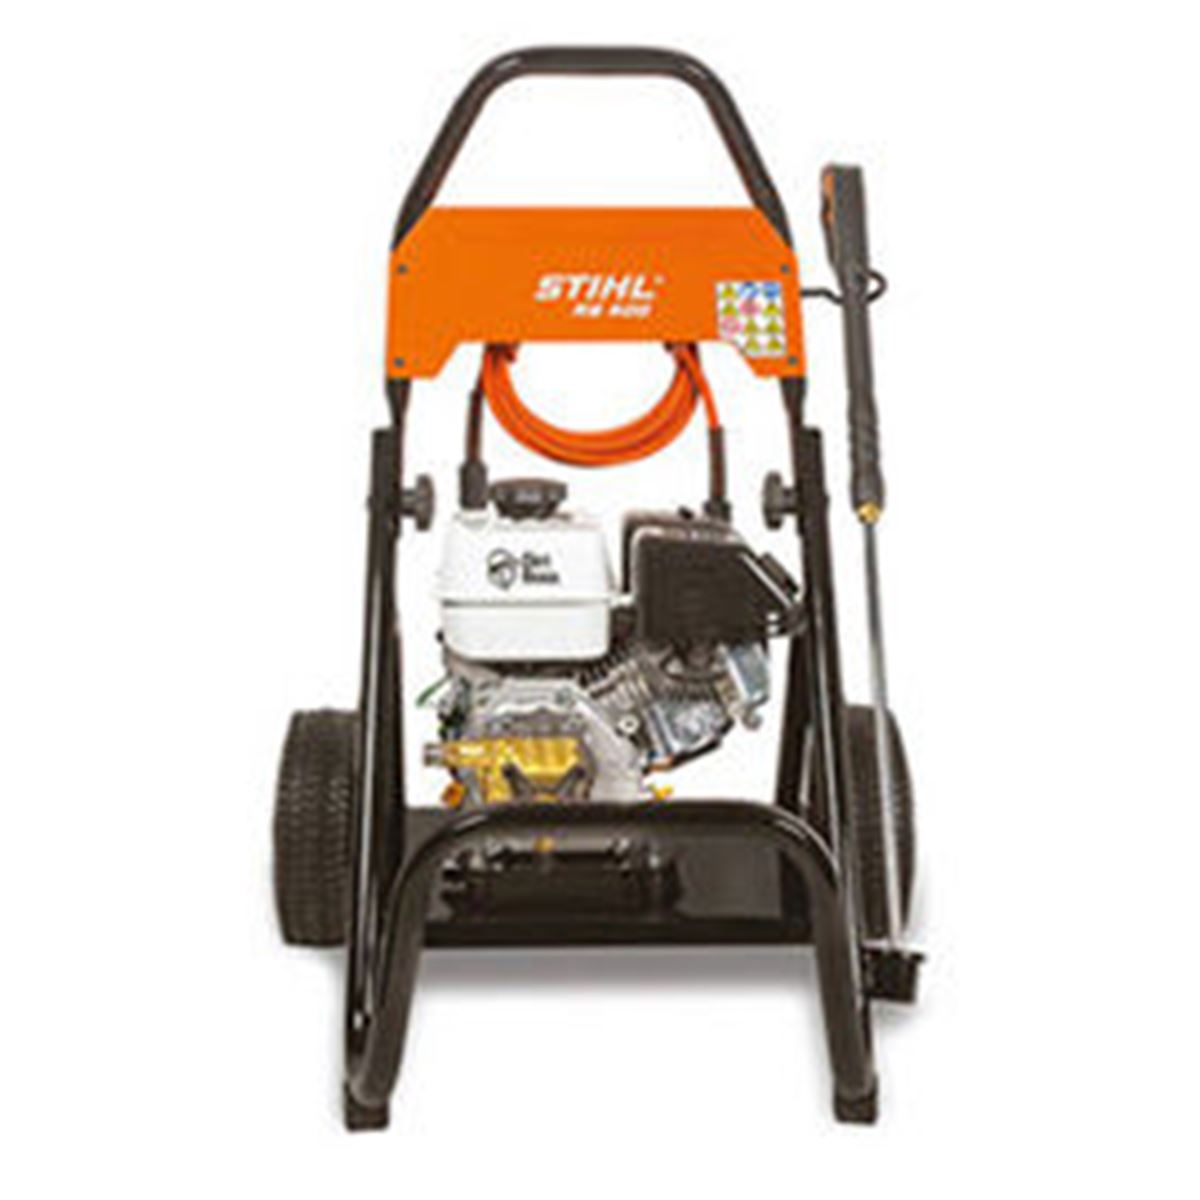 48 kW Petrol Pressure Washer for semi professional users